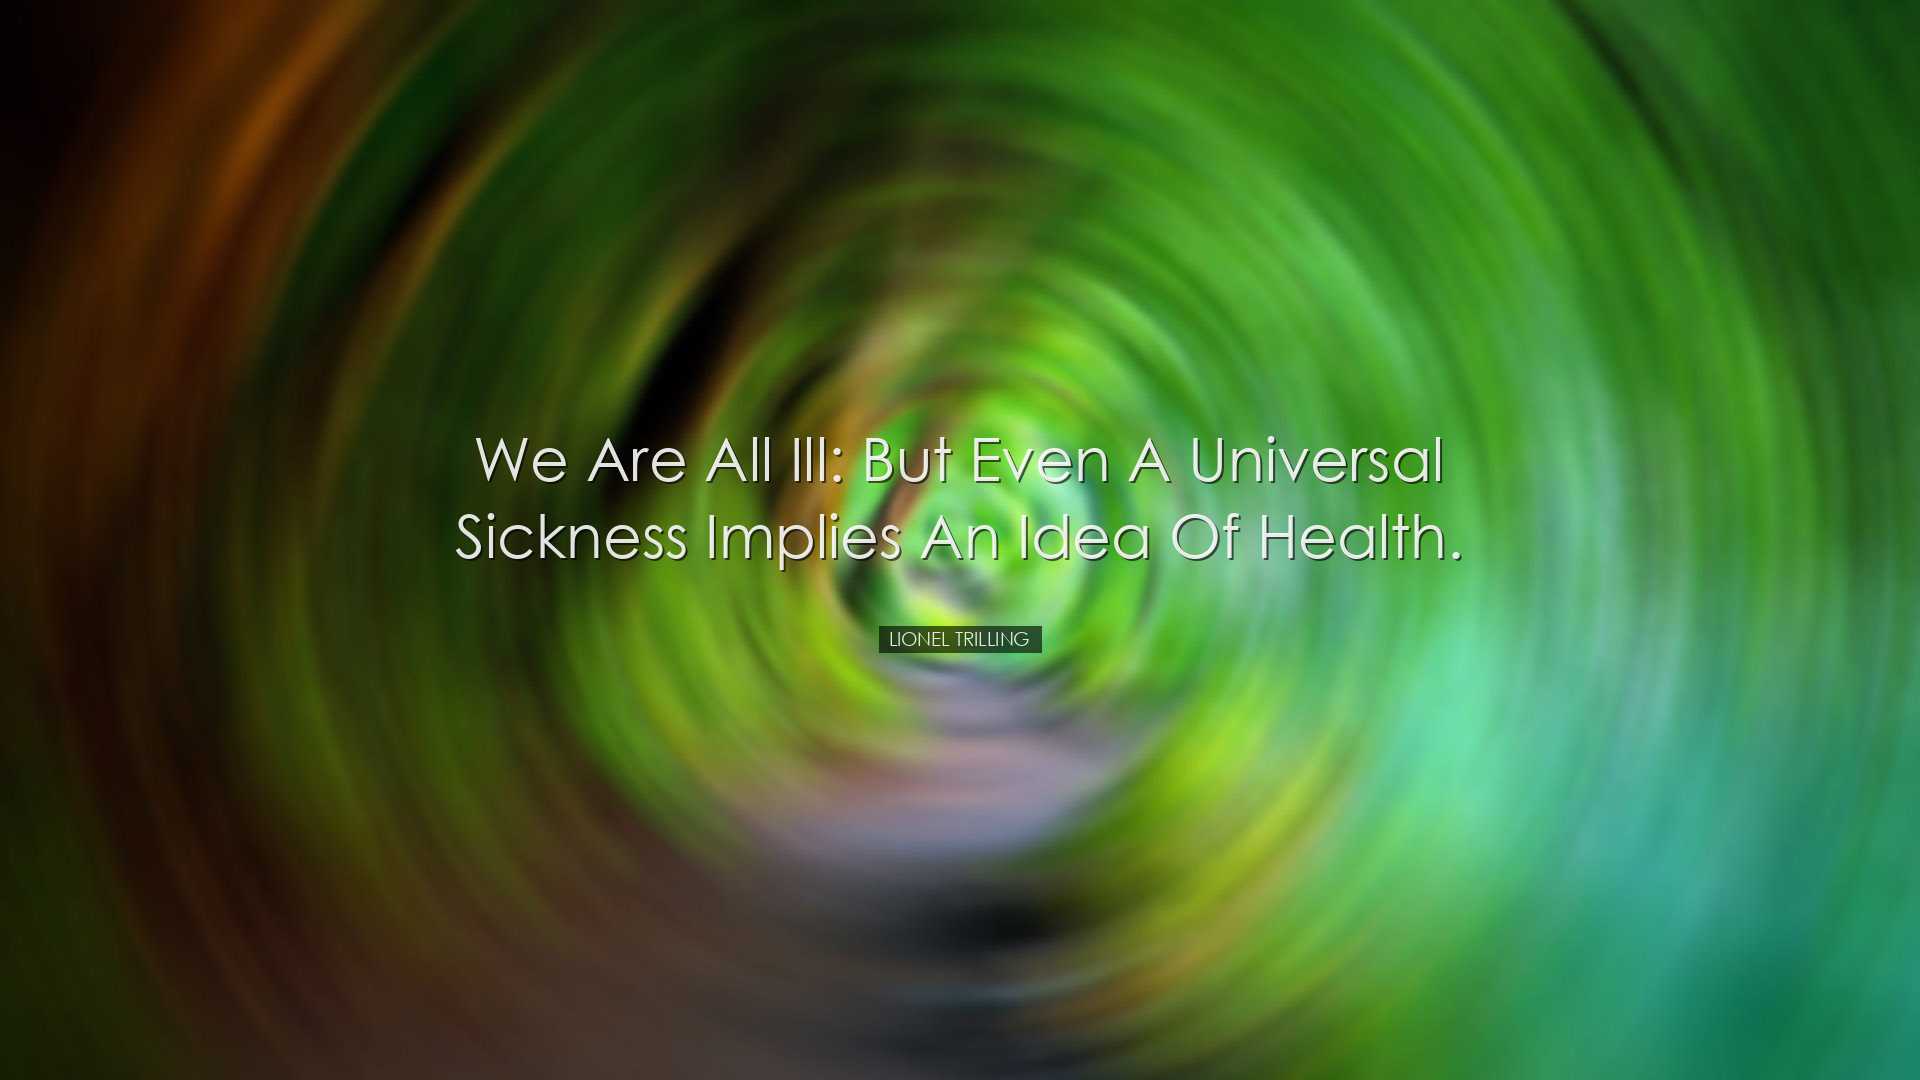 We are all ill: but even a universal sickness implies an idea of h